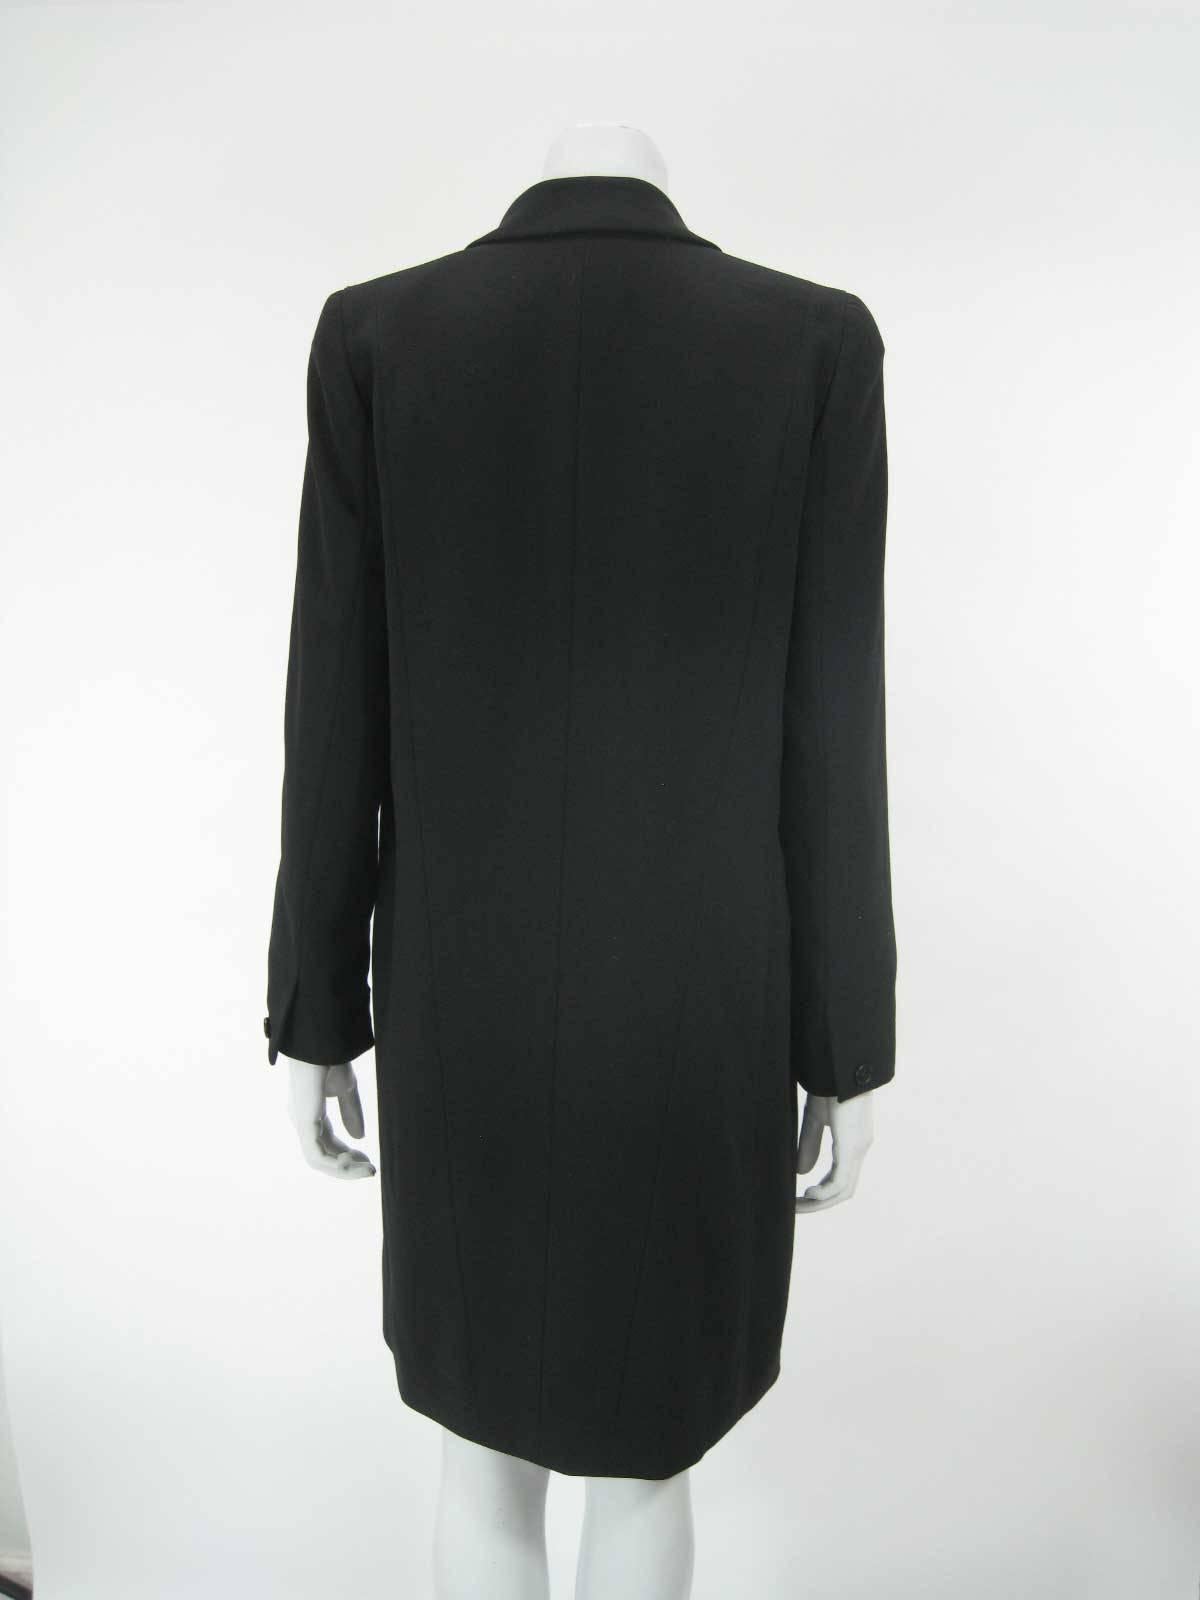 Chanel Boutique Black Long Double Breasted Evening Jacket. 2